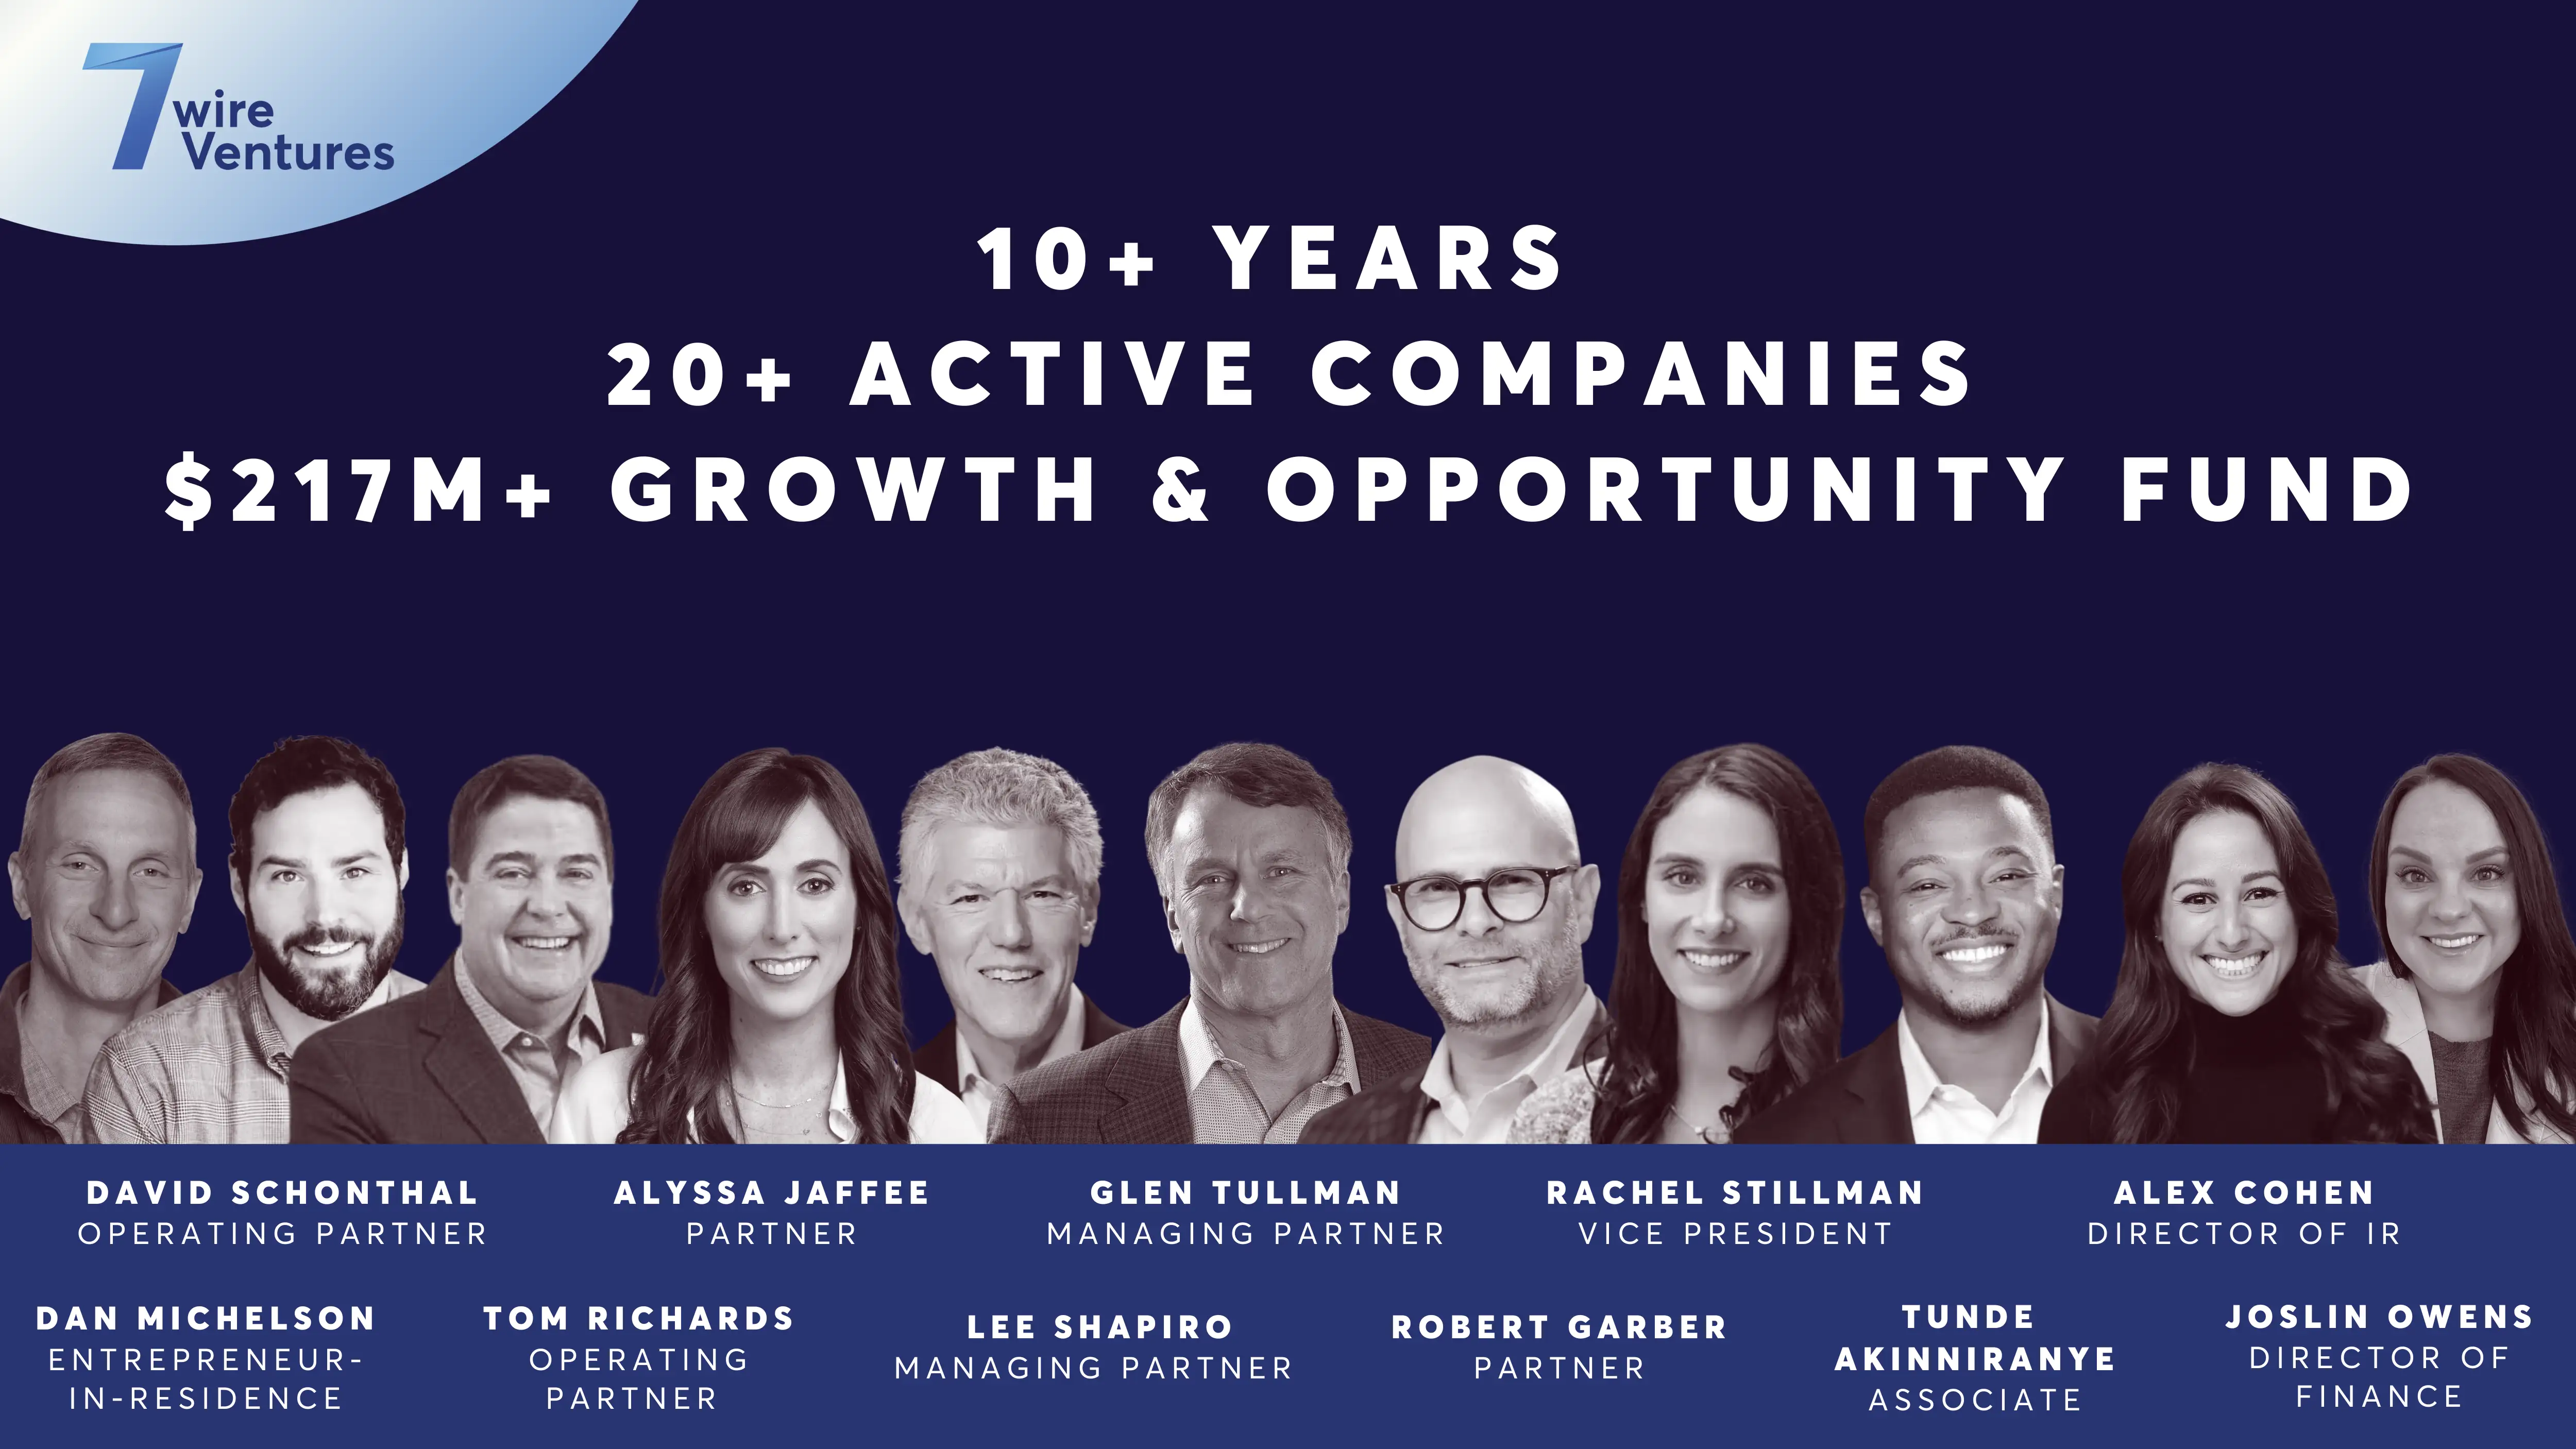 7wireVentures Launches $217M Growth & Opportunity Fund